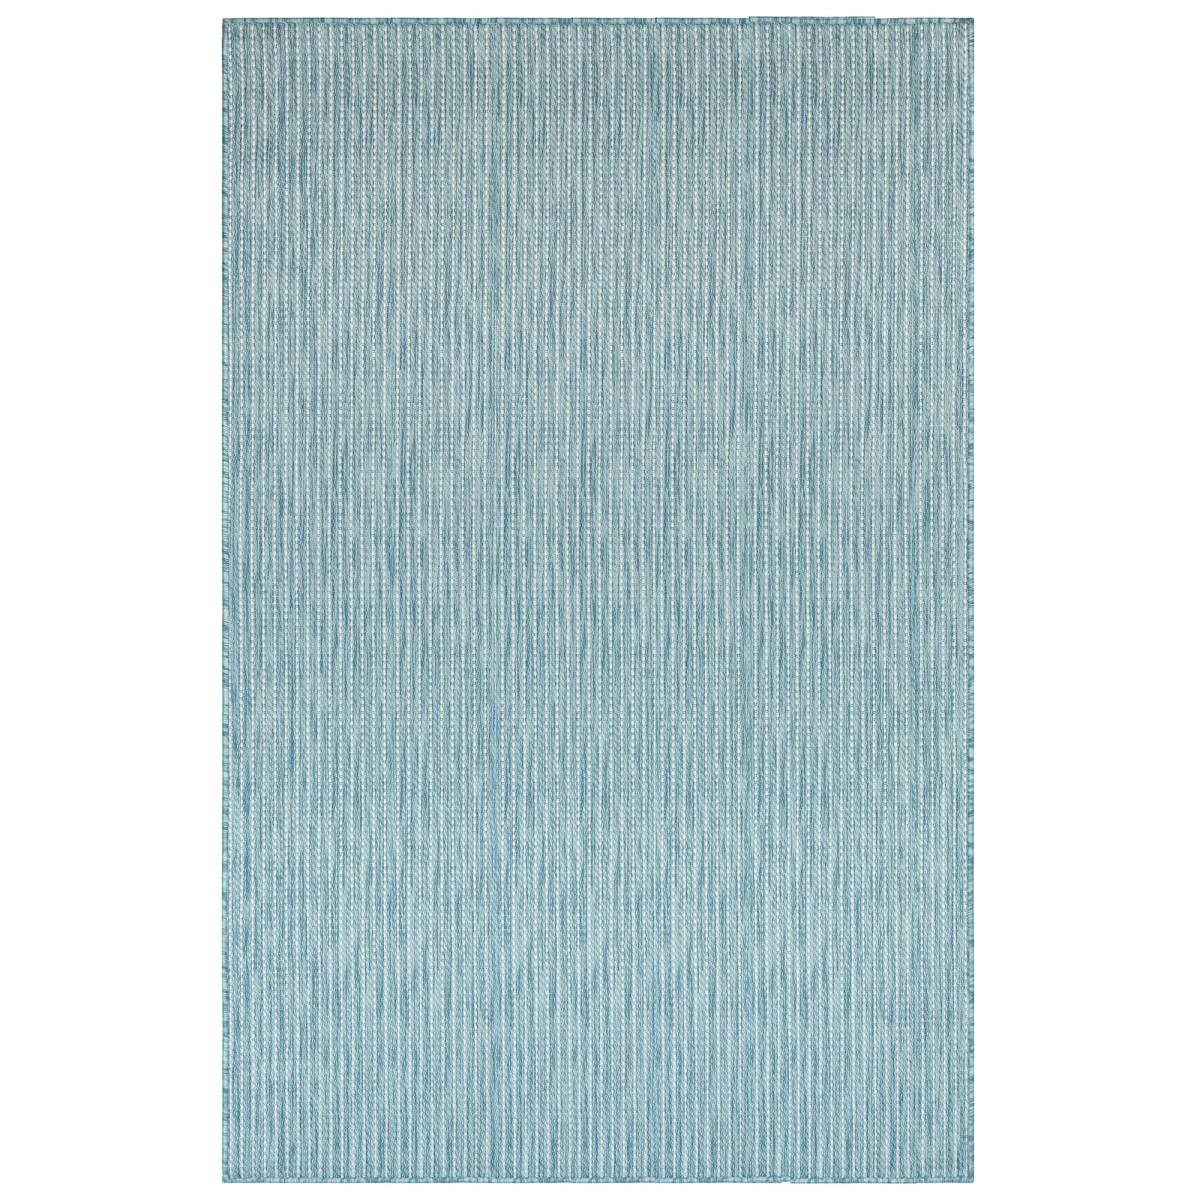 Trans-ocean Imports Cre58842204 4 Ft. 10 In. X 7 Ft. 6 In. Liora Manne Carmel Texture Stripe Indoor & Outdoor Wilton Woven Rectangle Rug - Aqua